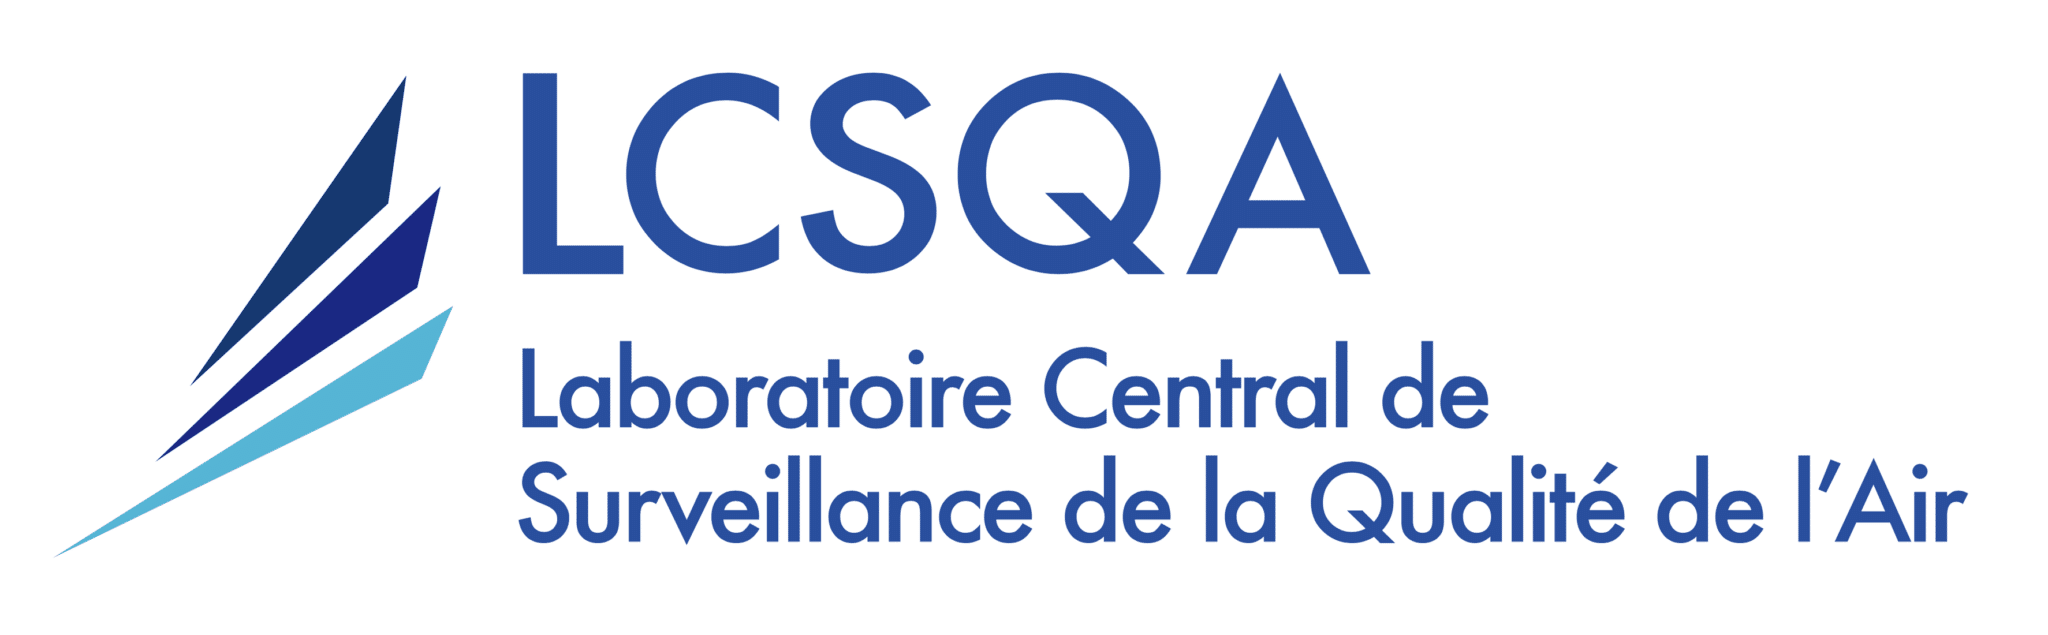 Image Central Laboratory for Air Quality Monitoring (LCSQA)